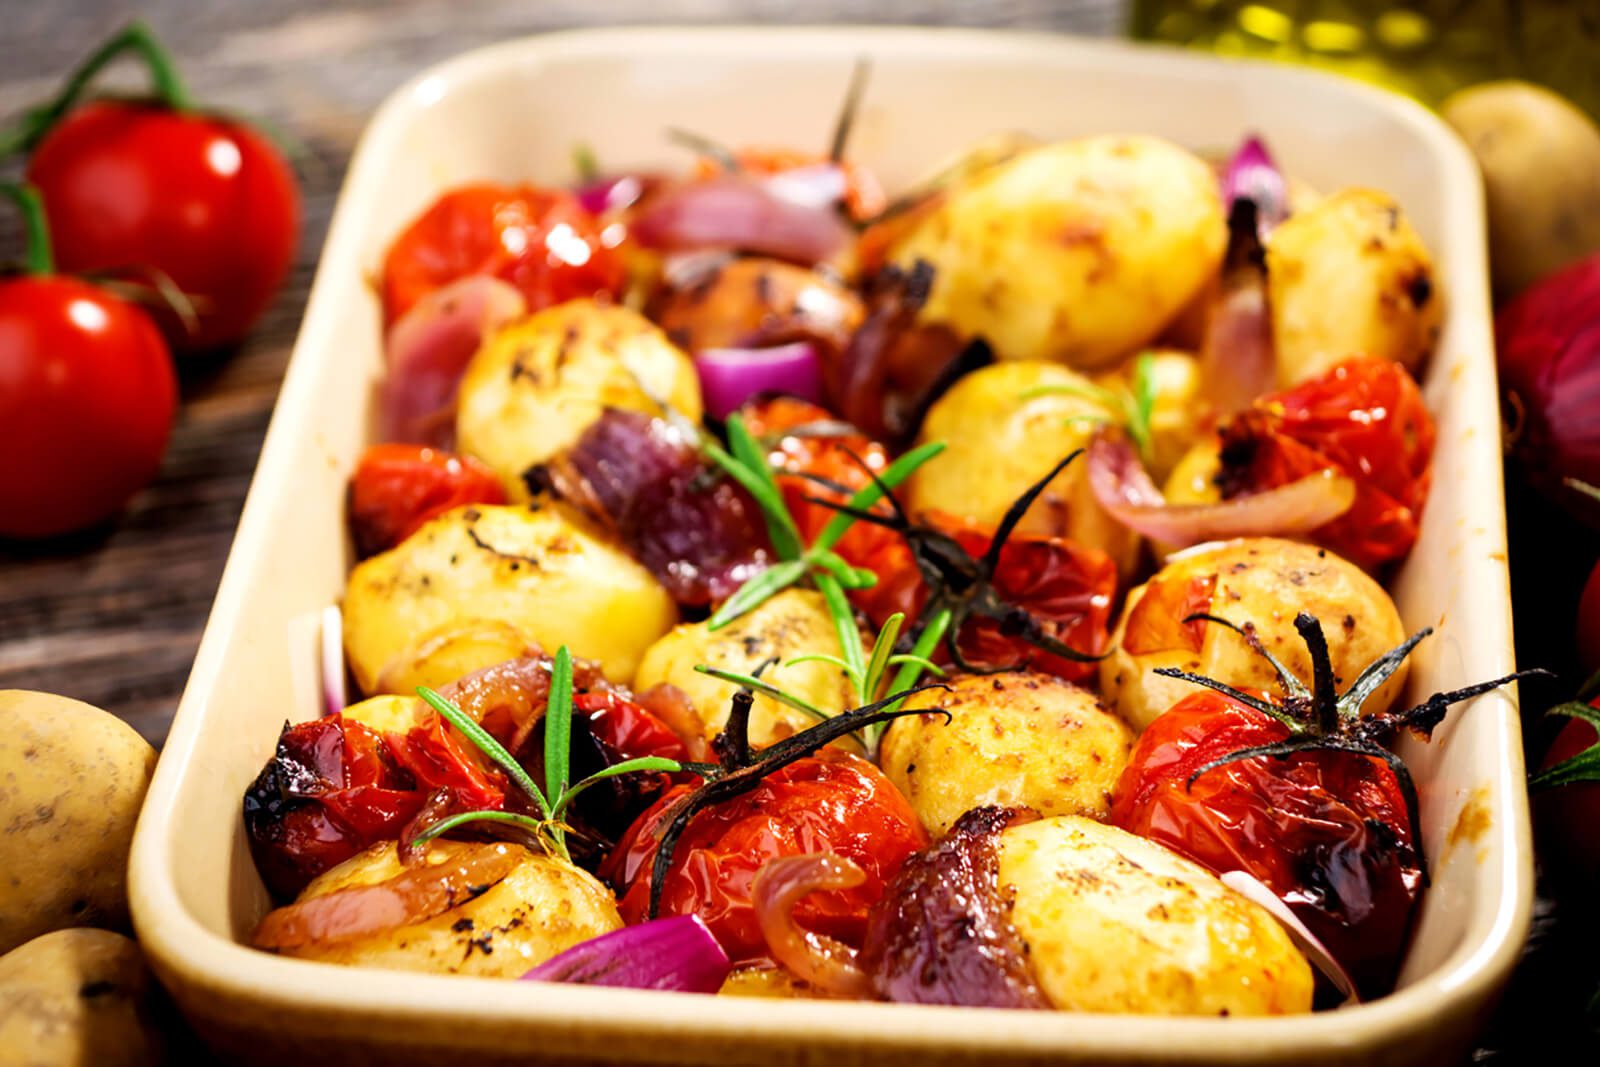 Rosemary Potato Bake with Onions and Tomatoes